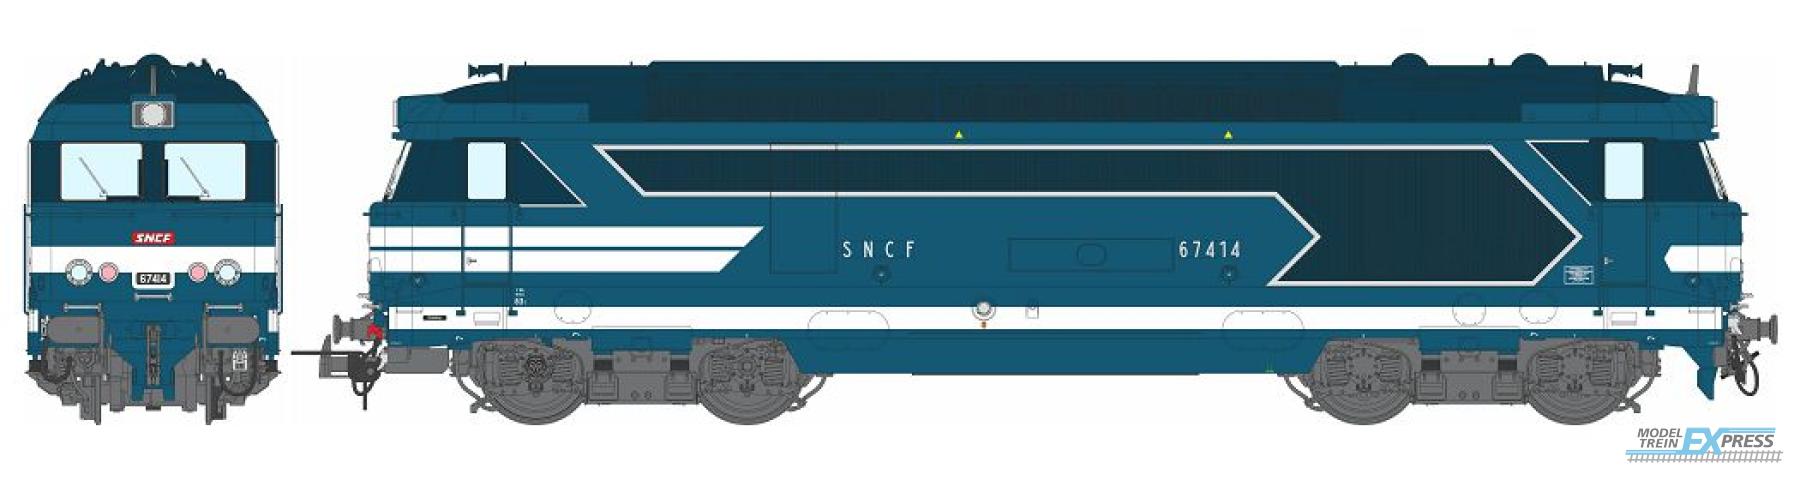 REE models MB-166S BB 67414 CHALINDREY Blue Era IV-V with number plate - DCC SOUND and Smoke